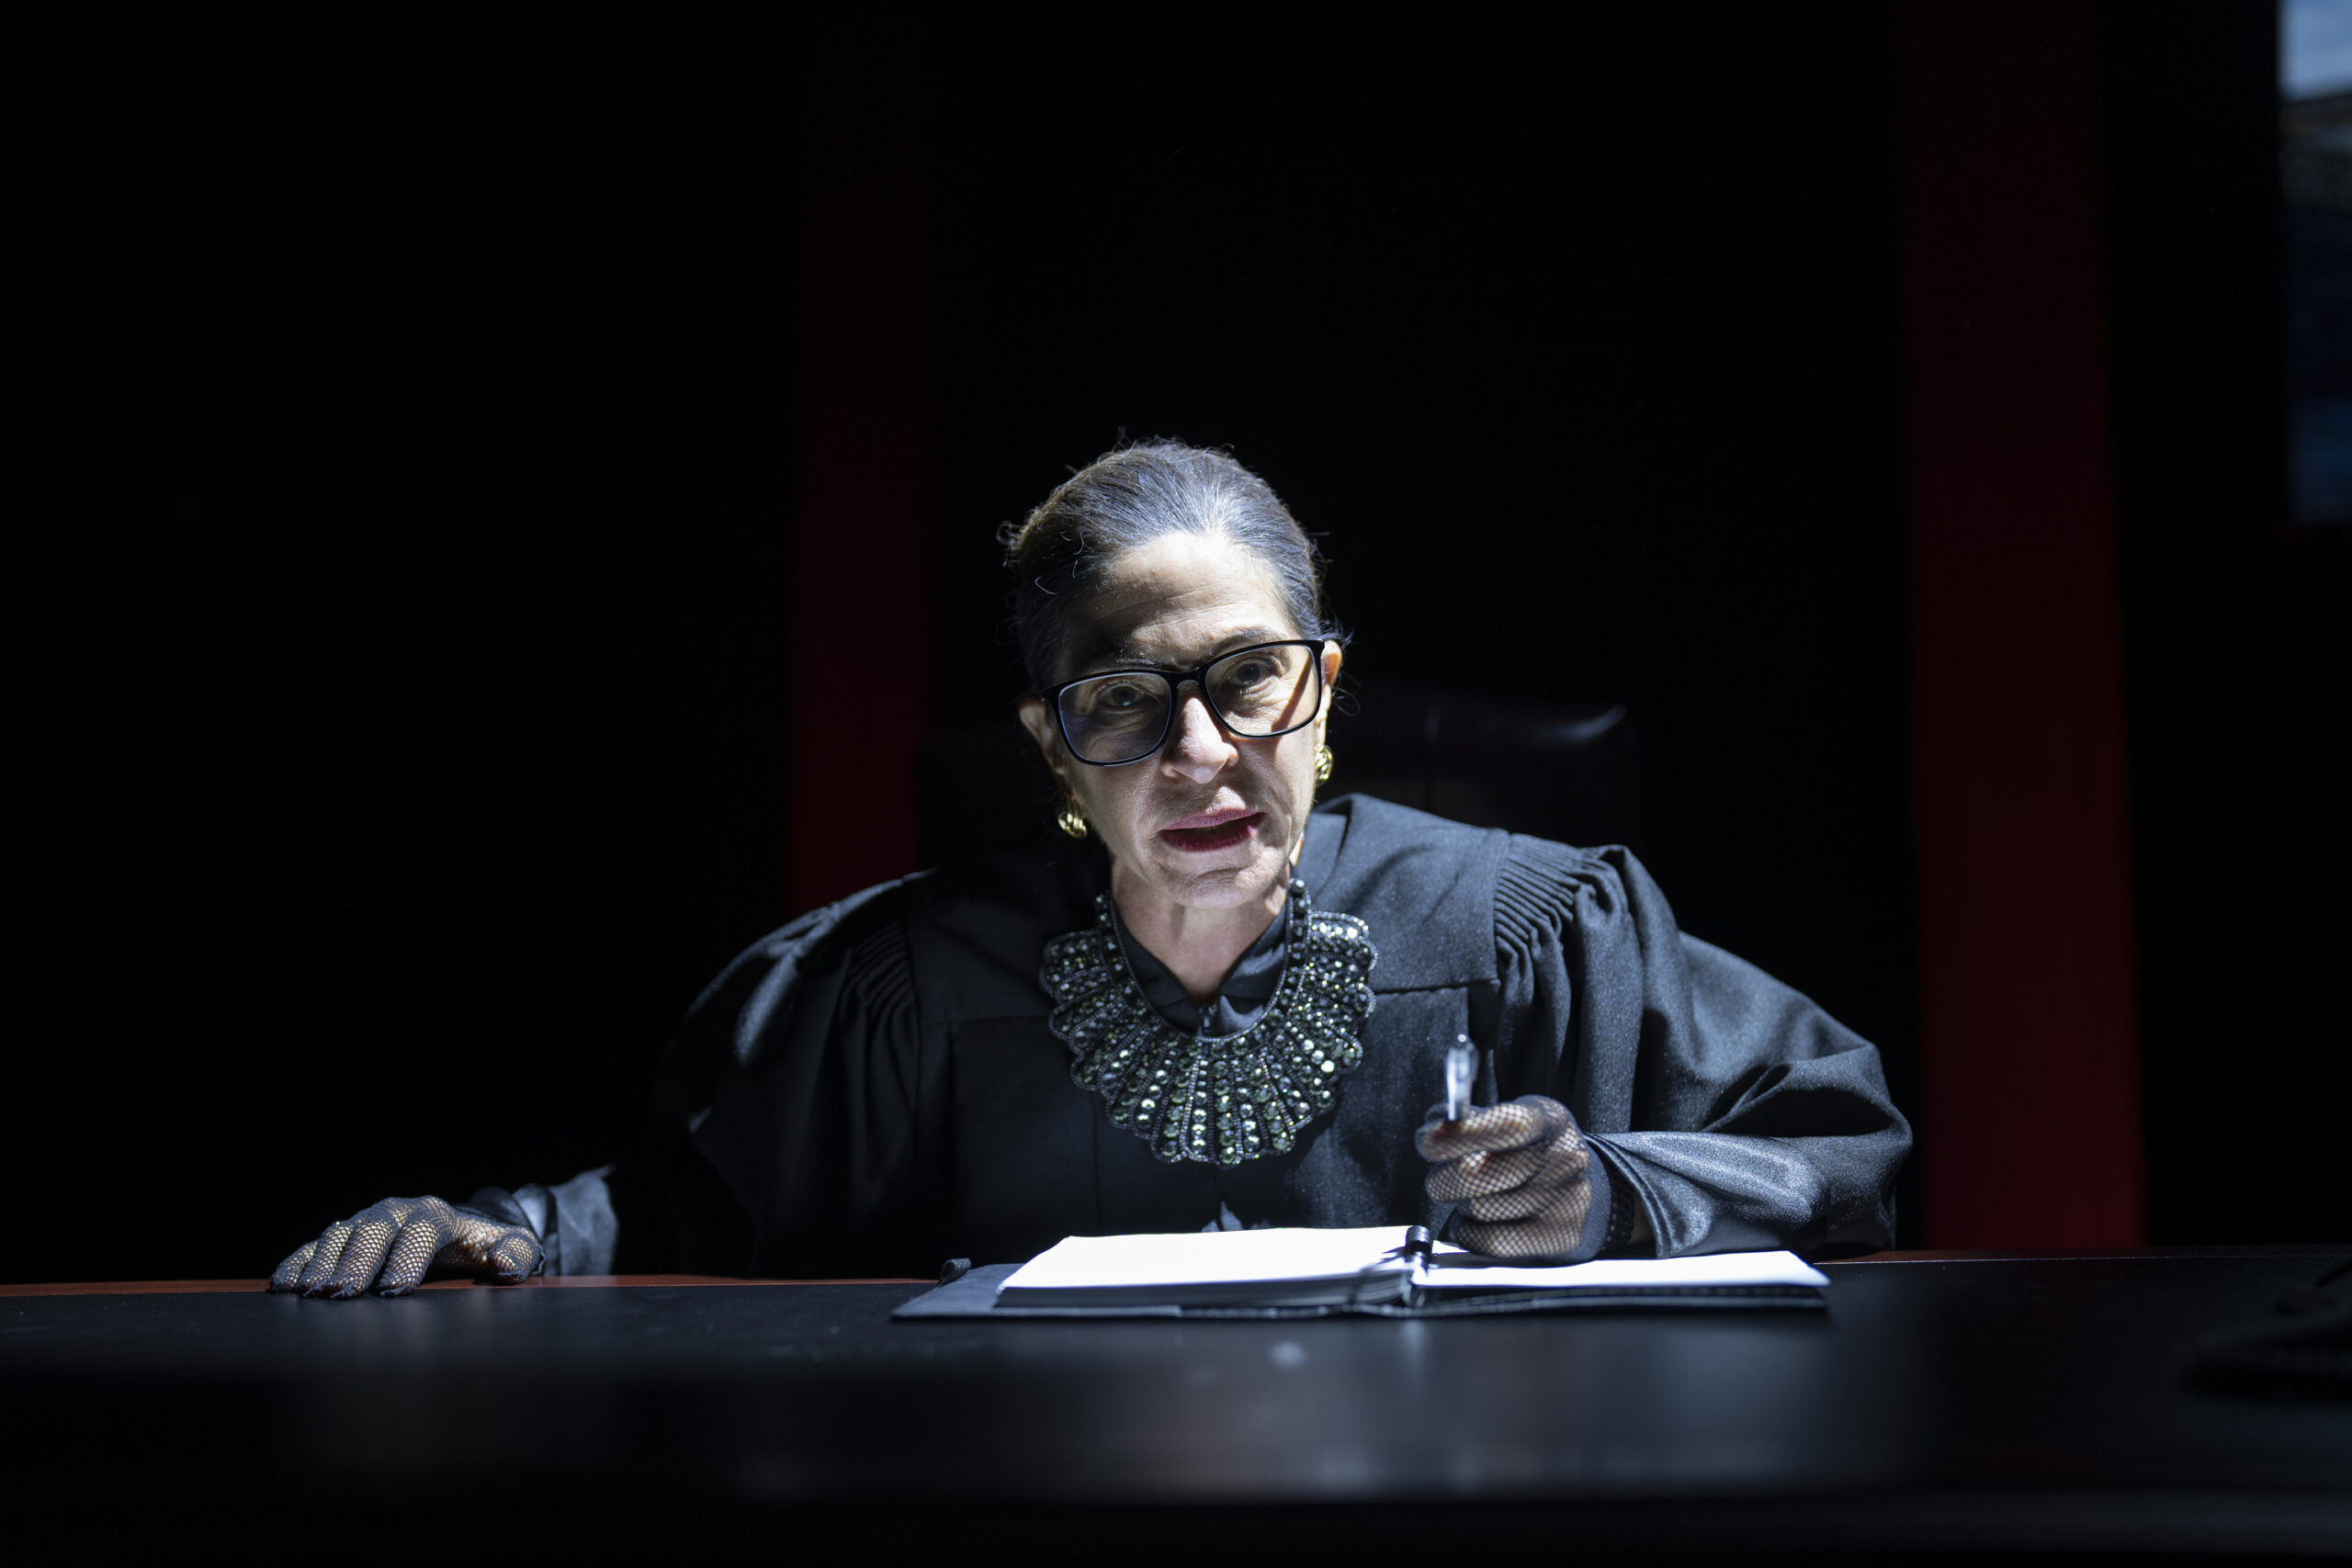 Michelle Azar as Ruth Bader Ginsburg in “All Things Equal: The Life and Trials of Ruth Bader Ginsburg” at freeFall Theatre in St. Petersburg, Florida. COURTESY FREEFALL THEATRE